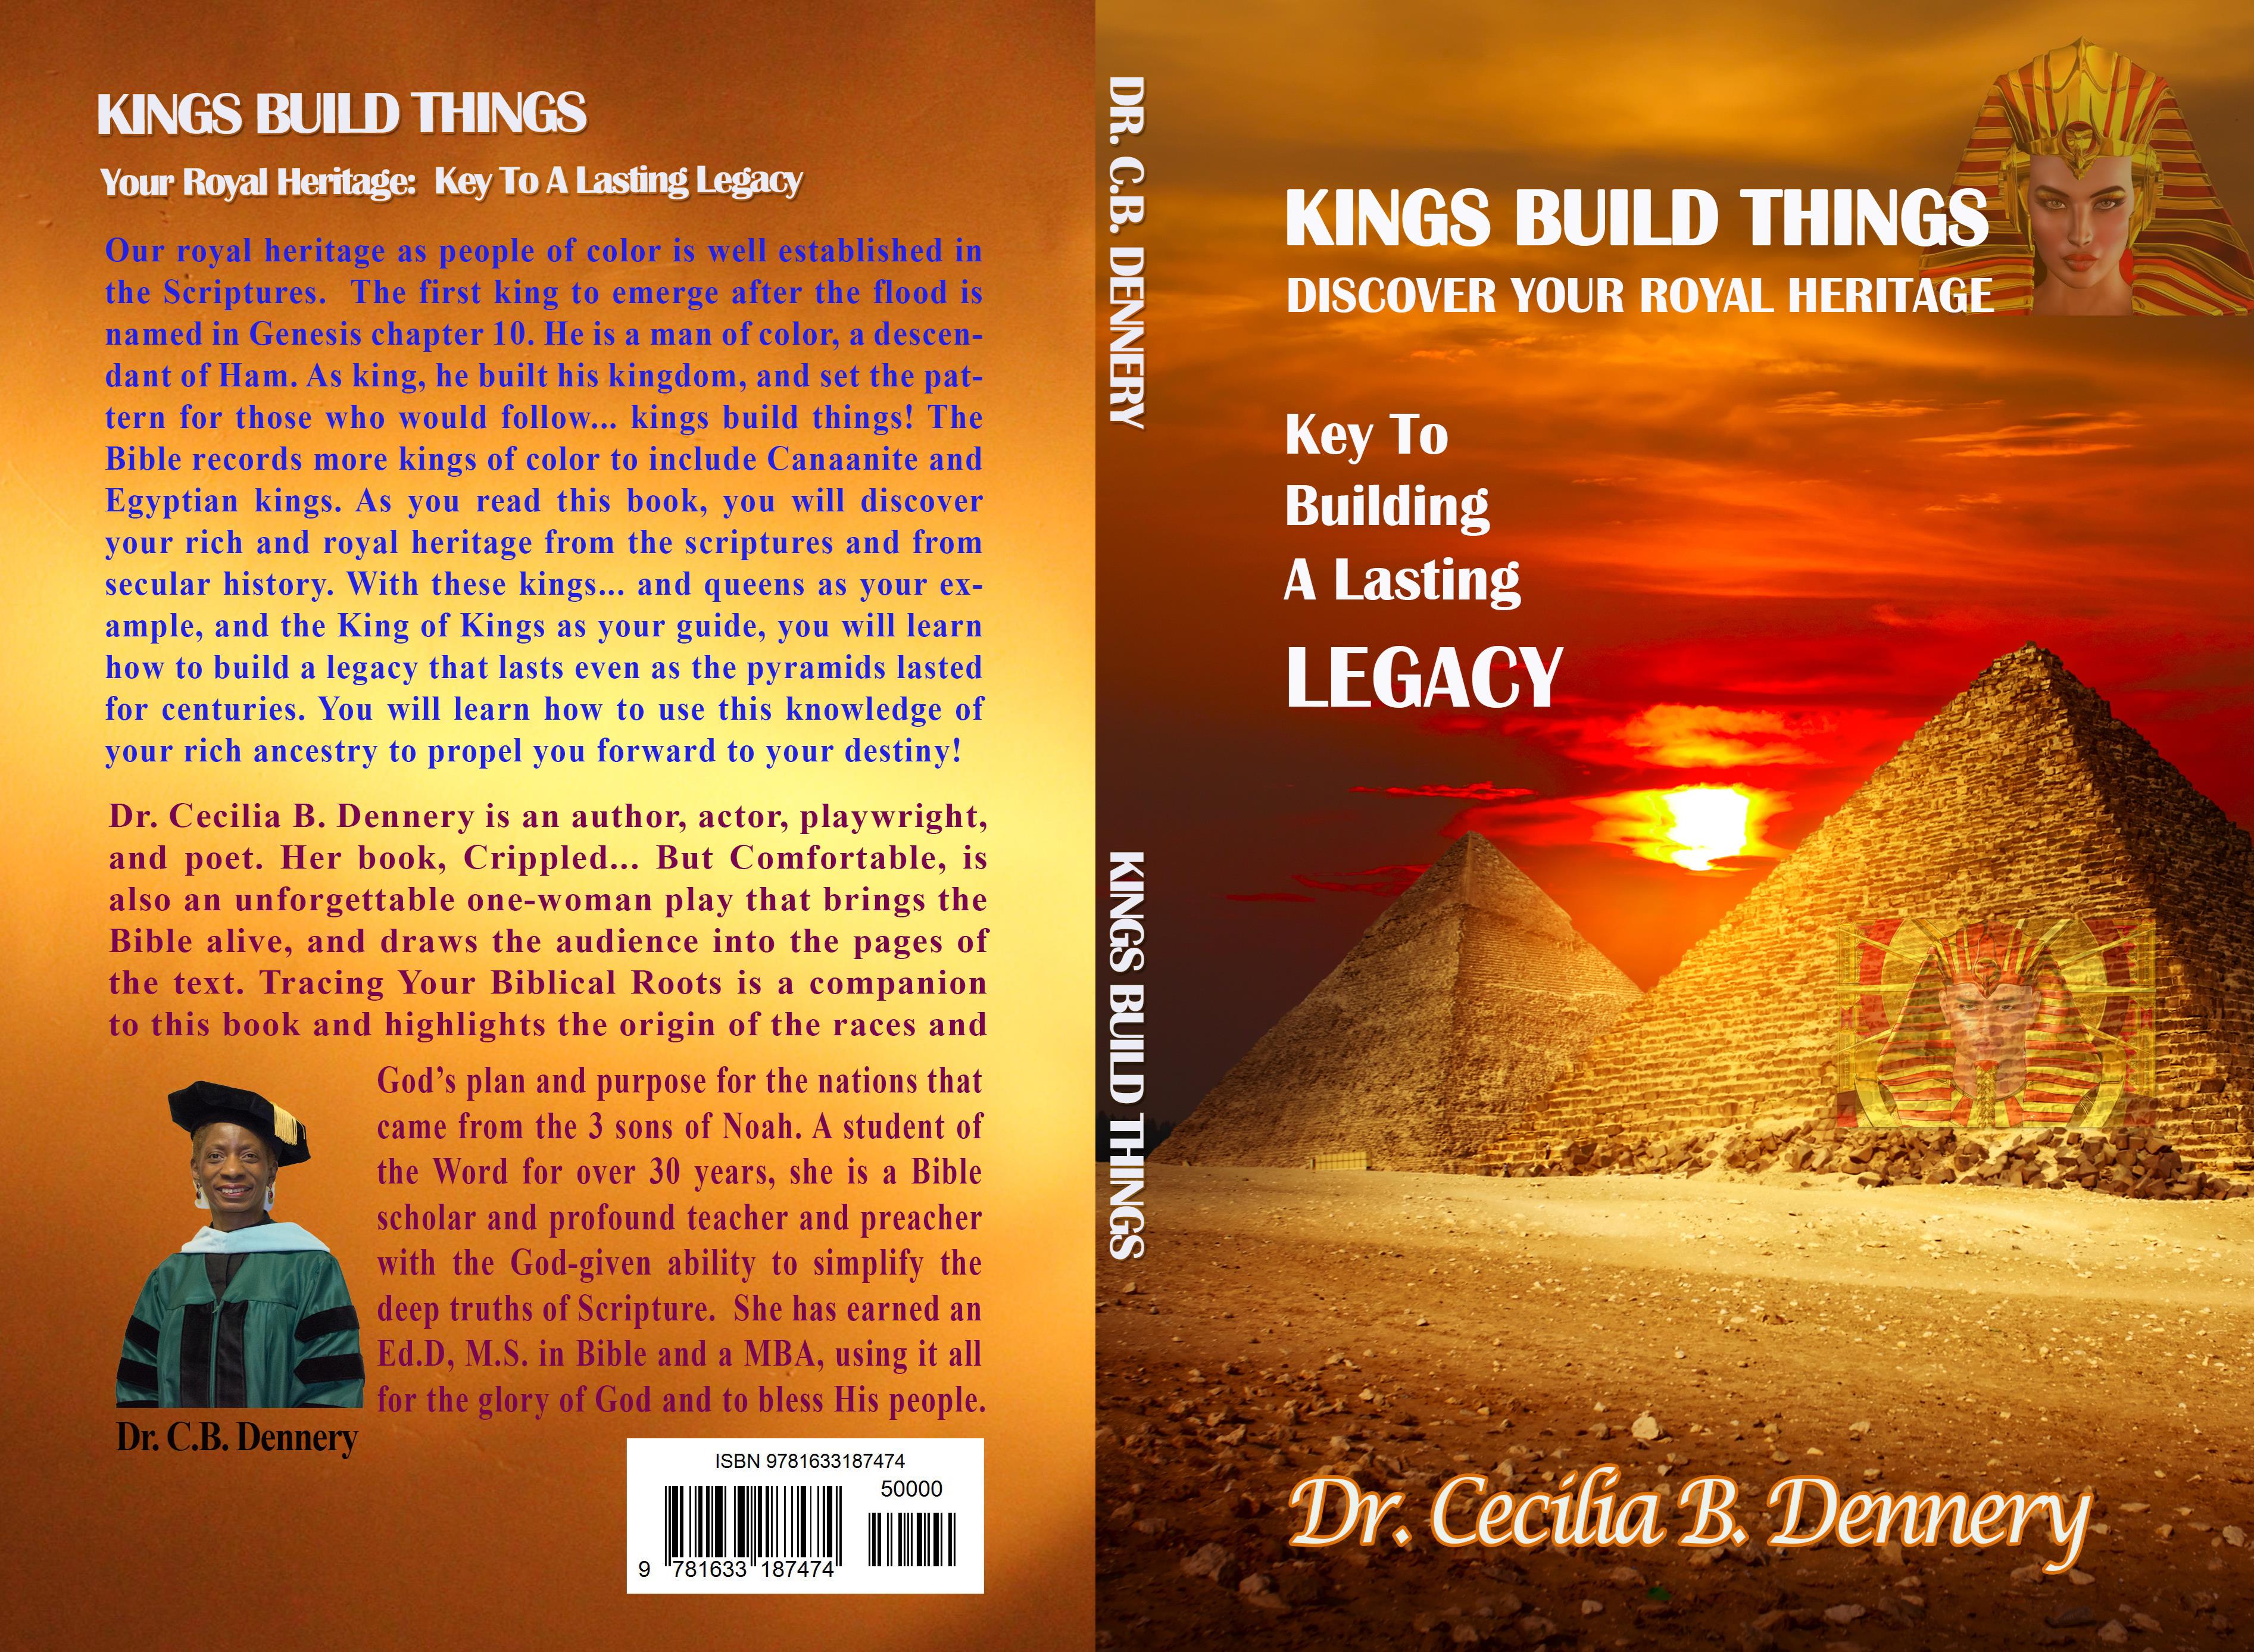 KINGS BUILD THINGS: Discover Your Royal Heritage - Key To building A Lasting Legacy cover image